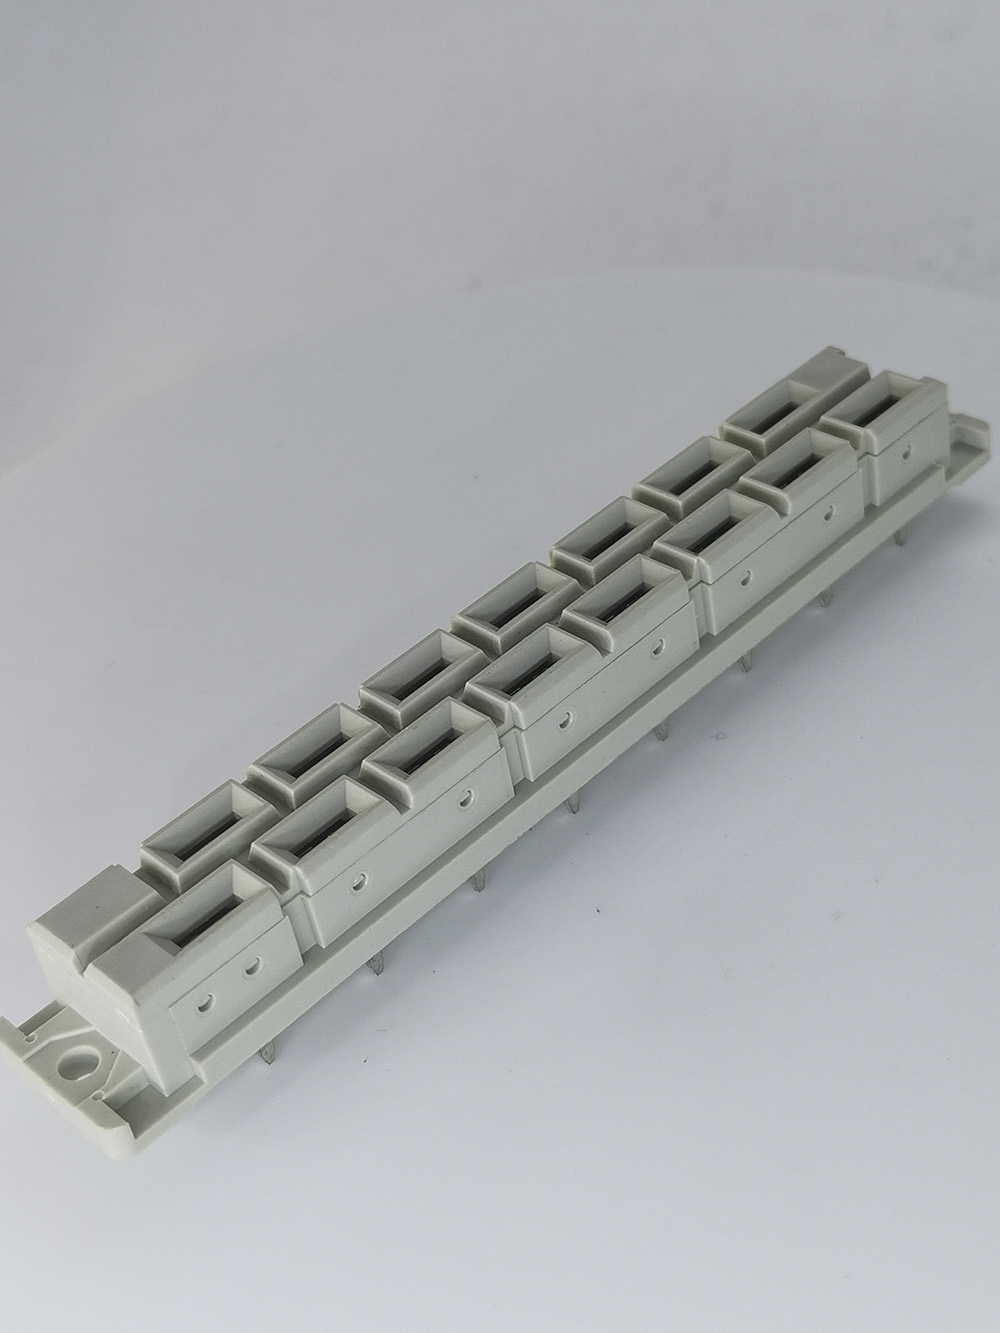 Vertical Female H15 Type High Power DIN41612 Connectors